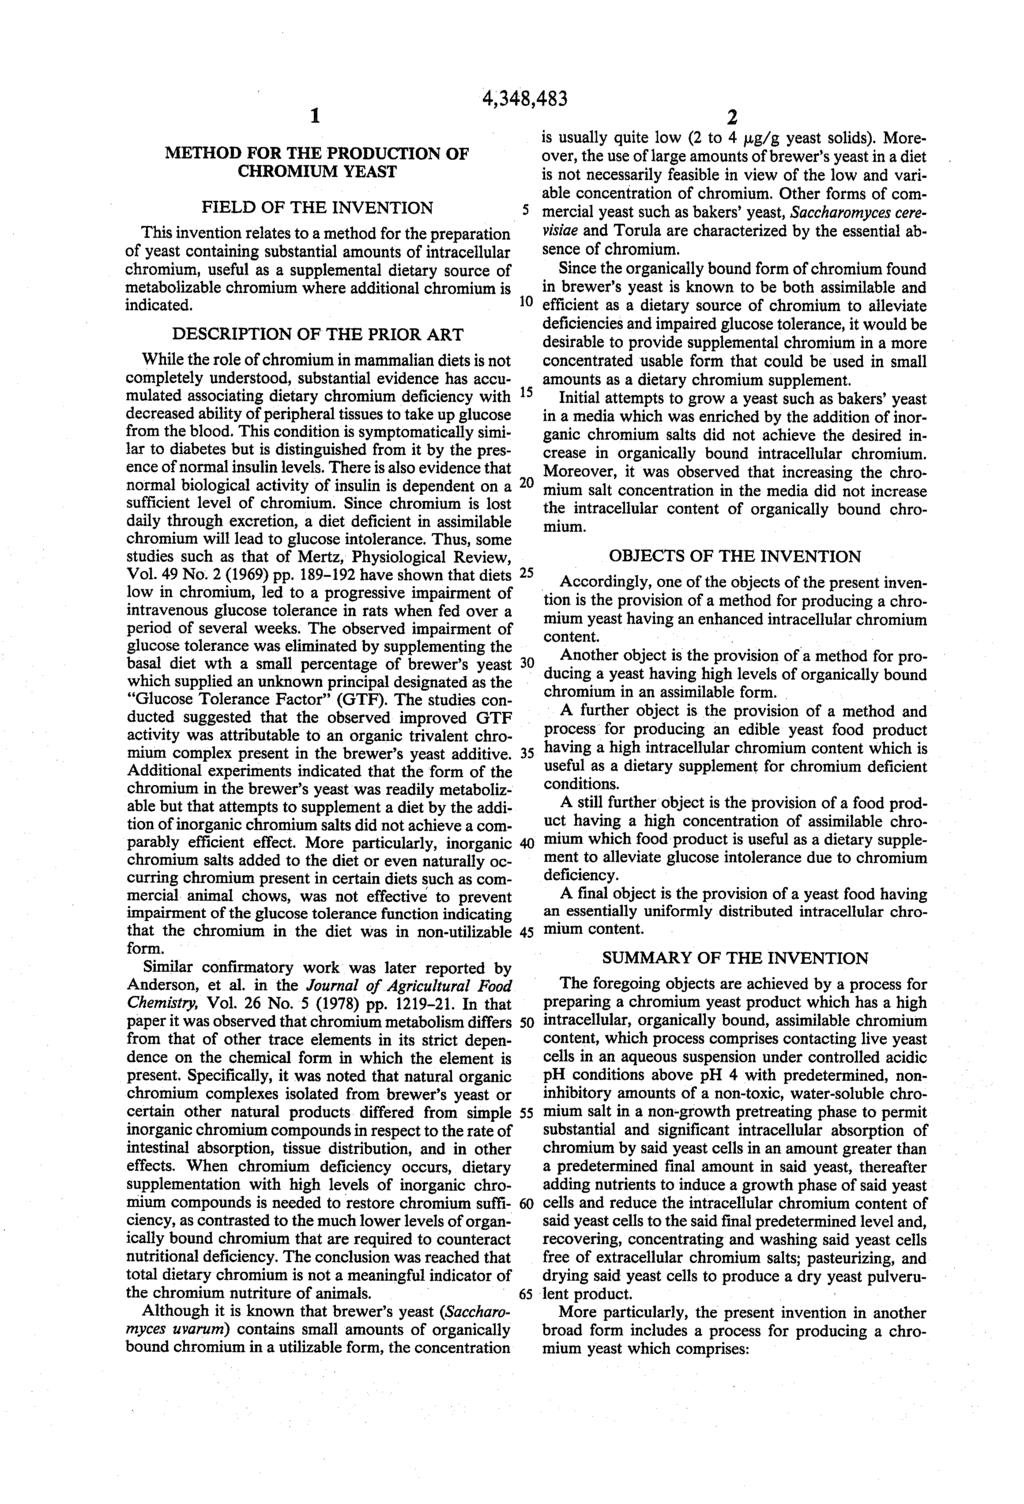 1 METHOD FOR THE PRODUCTION OF CHROMUM YEAST FIELD OF THE INVENTION This invention relates to a method for the preparation of yeast containing substantial amounts of intracellular chromium, useful as